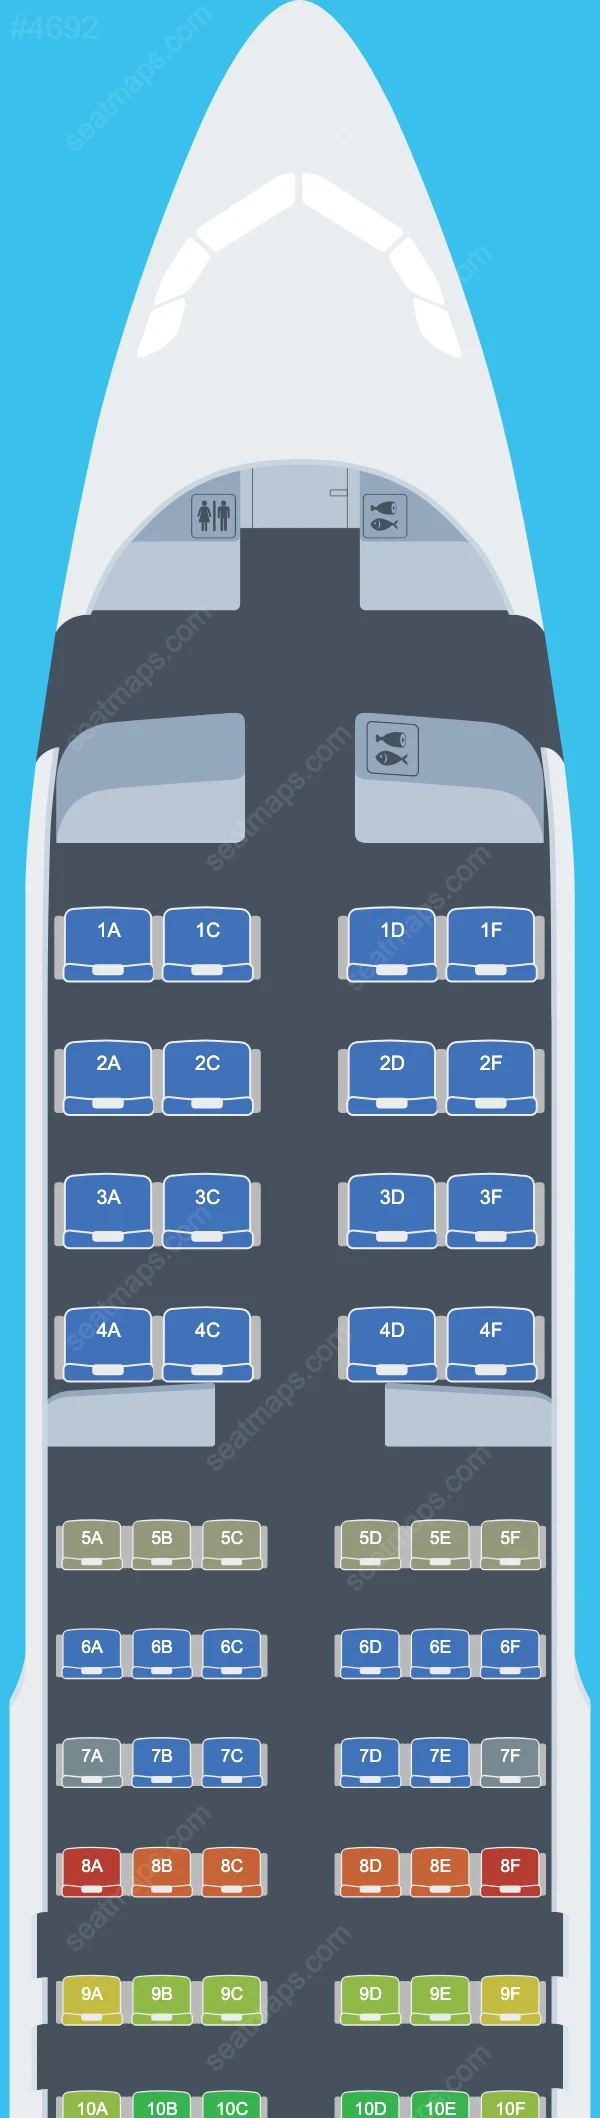 Lao Airlines Airbus A320 Seat Maps A320-200 V.1